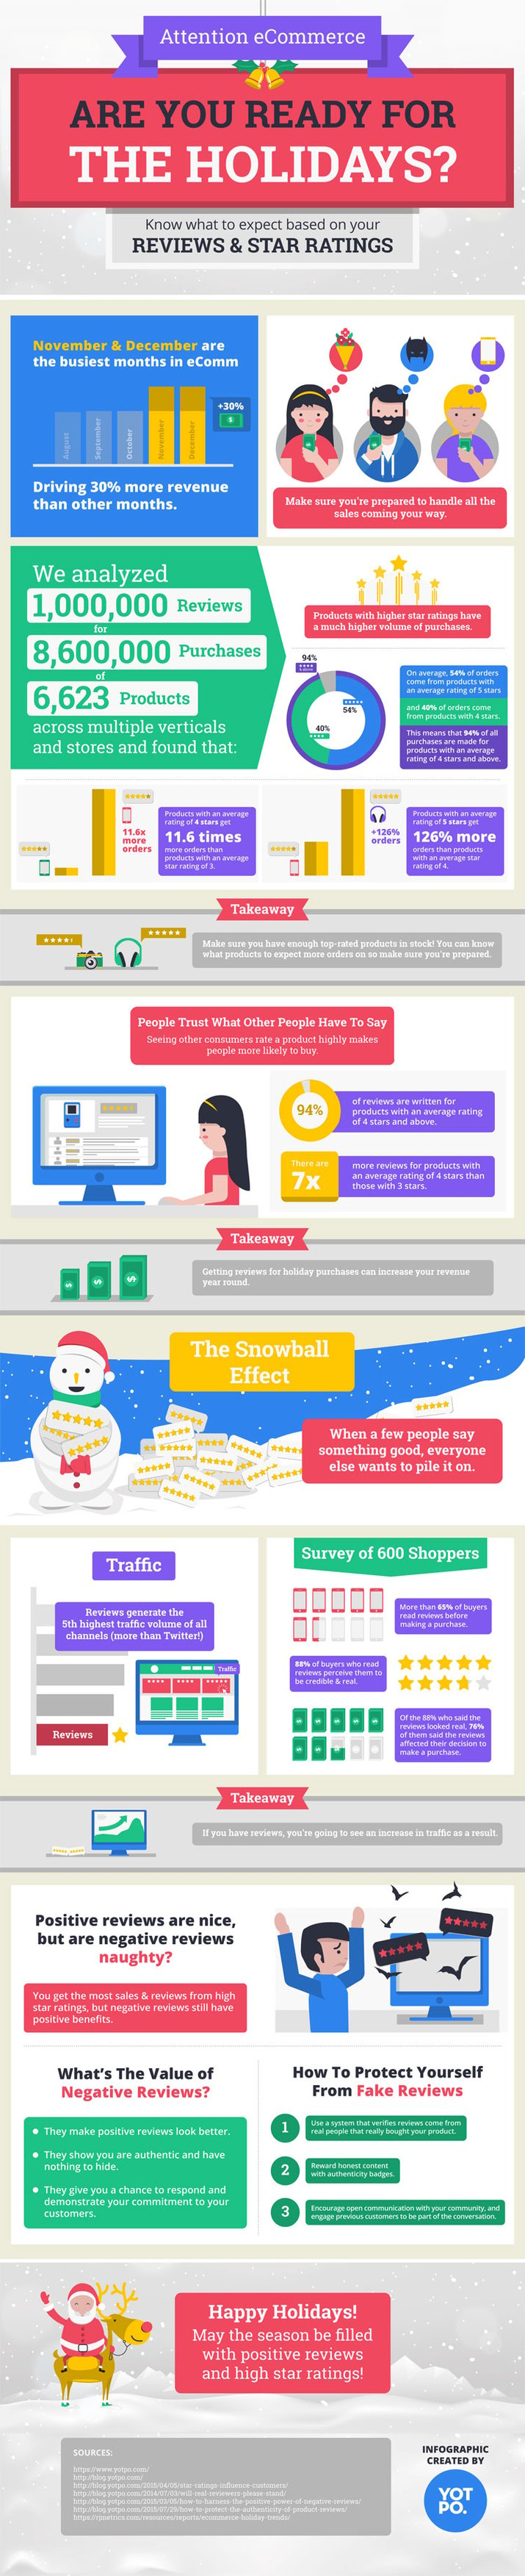 Holiday-ecommerce-infographic.jpg